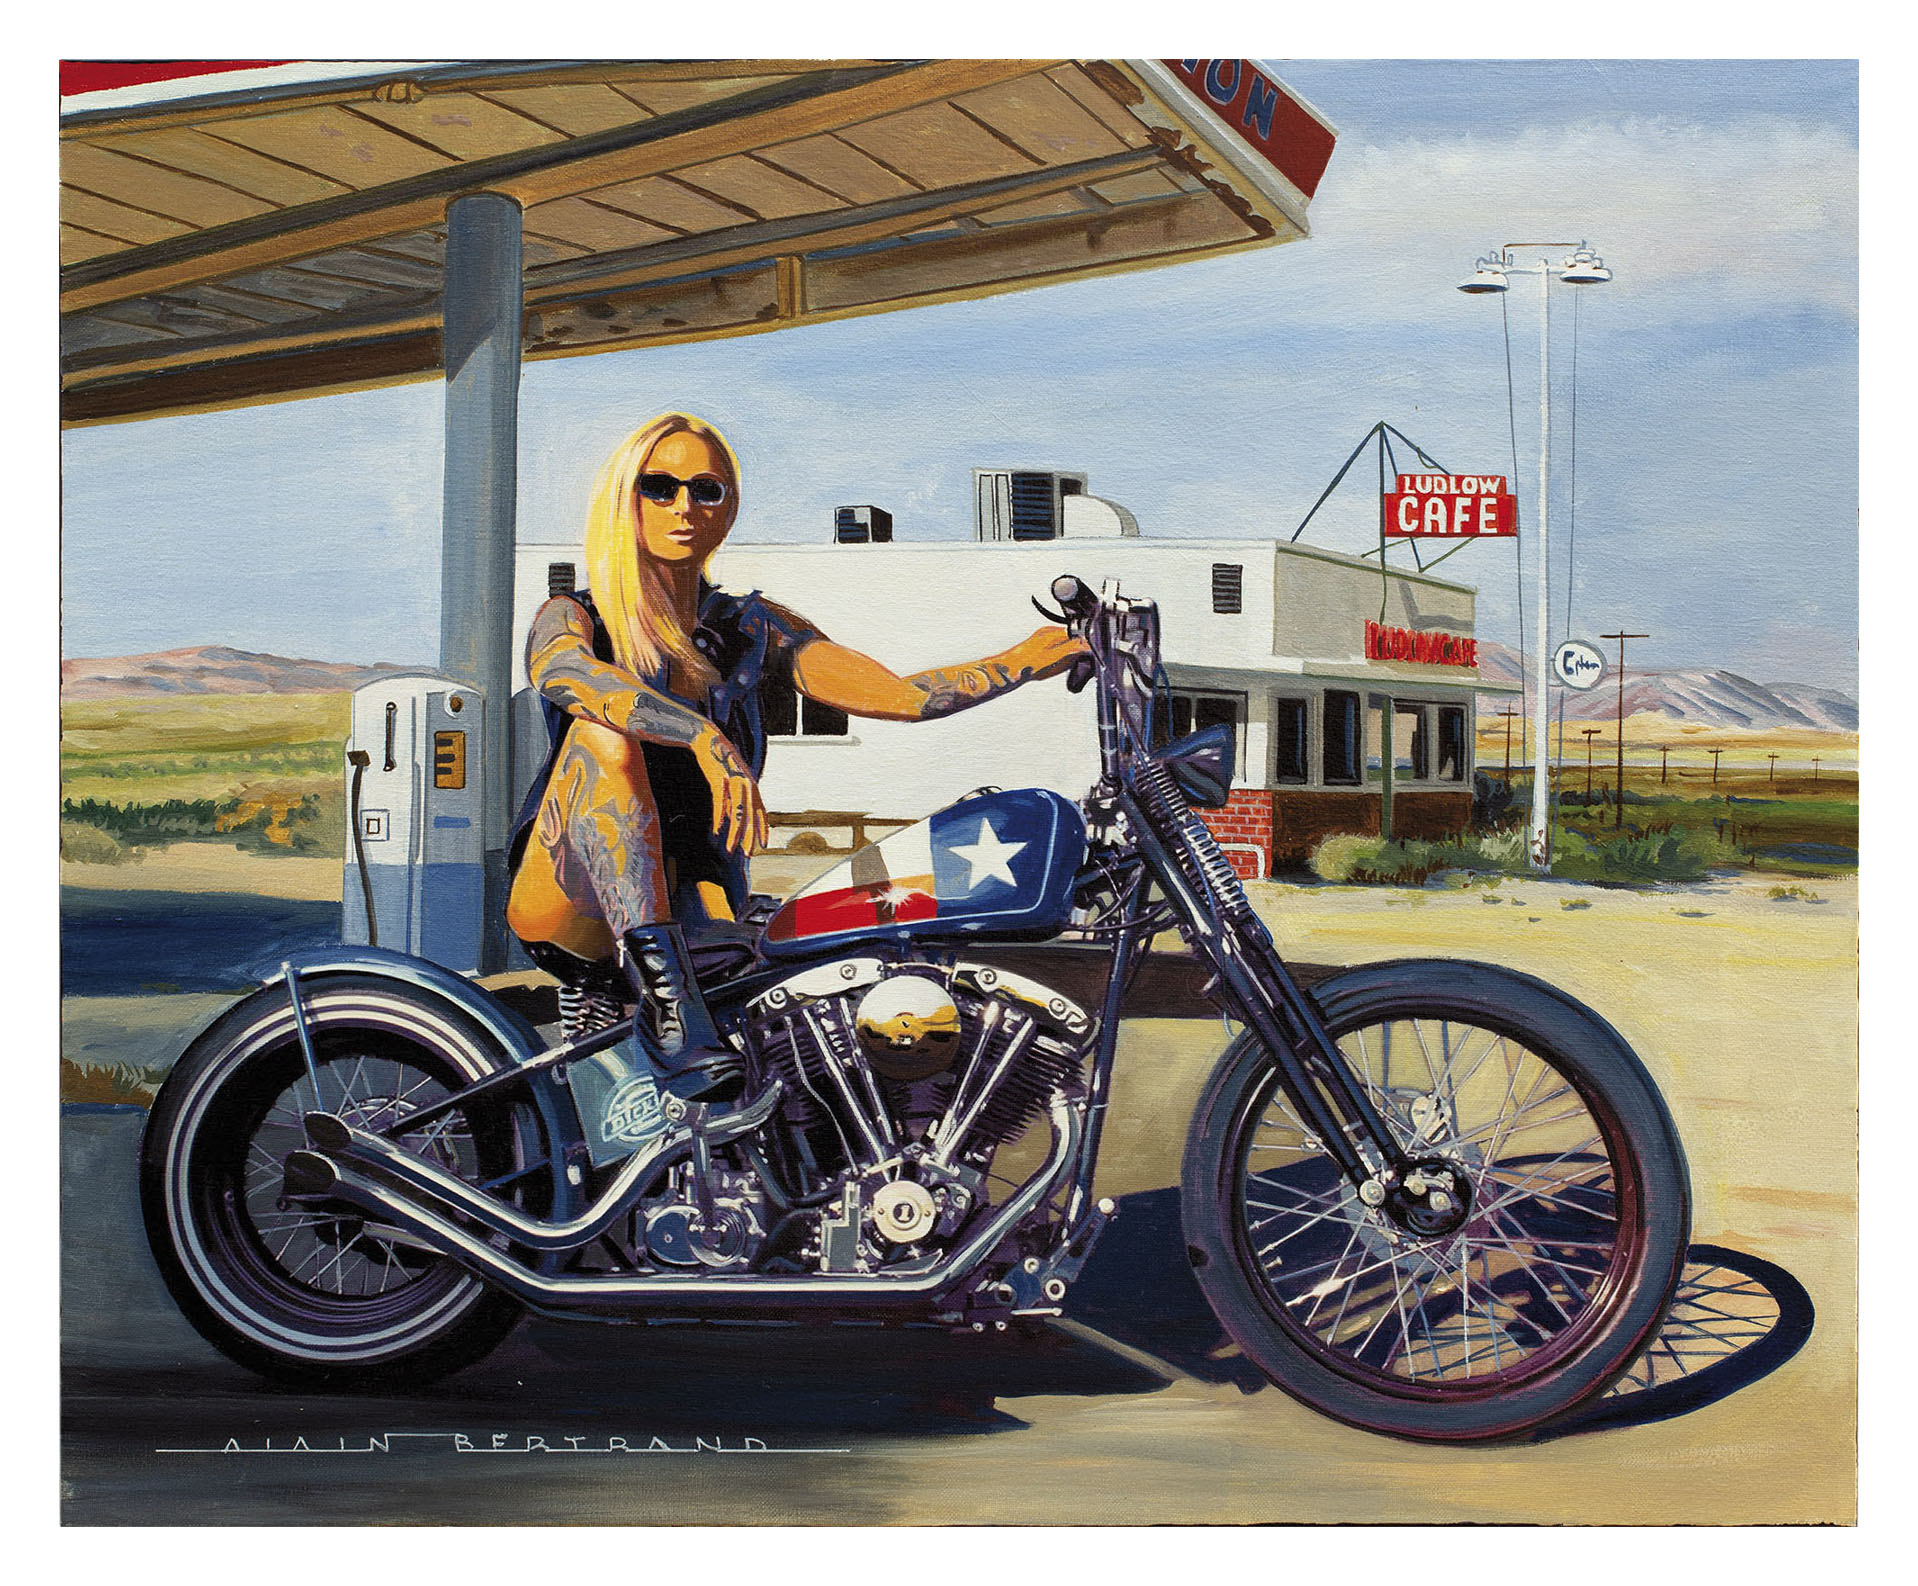 LUDLOW CAFE ROUTE 66 73X60